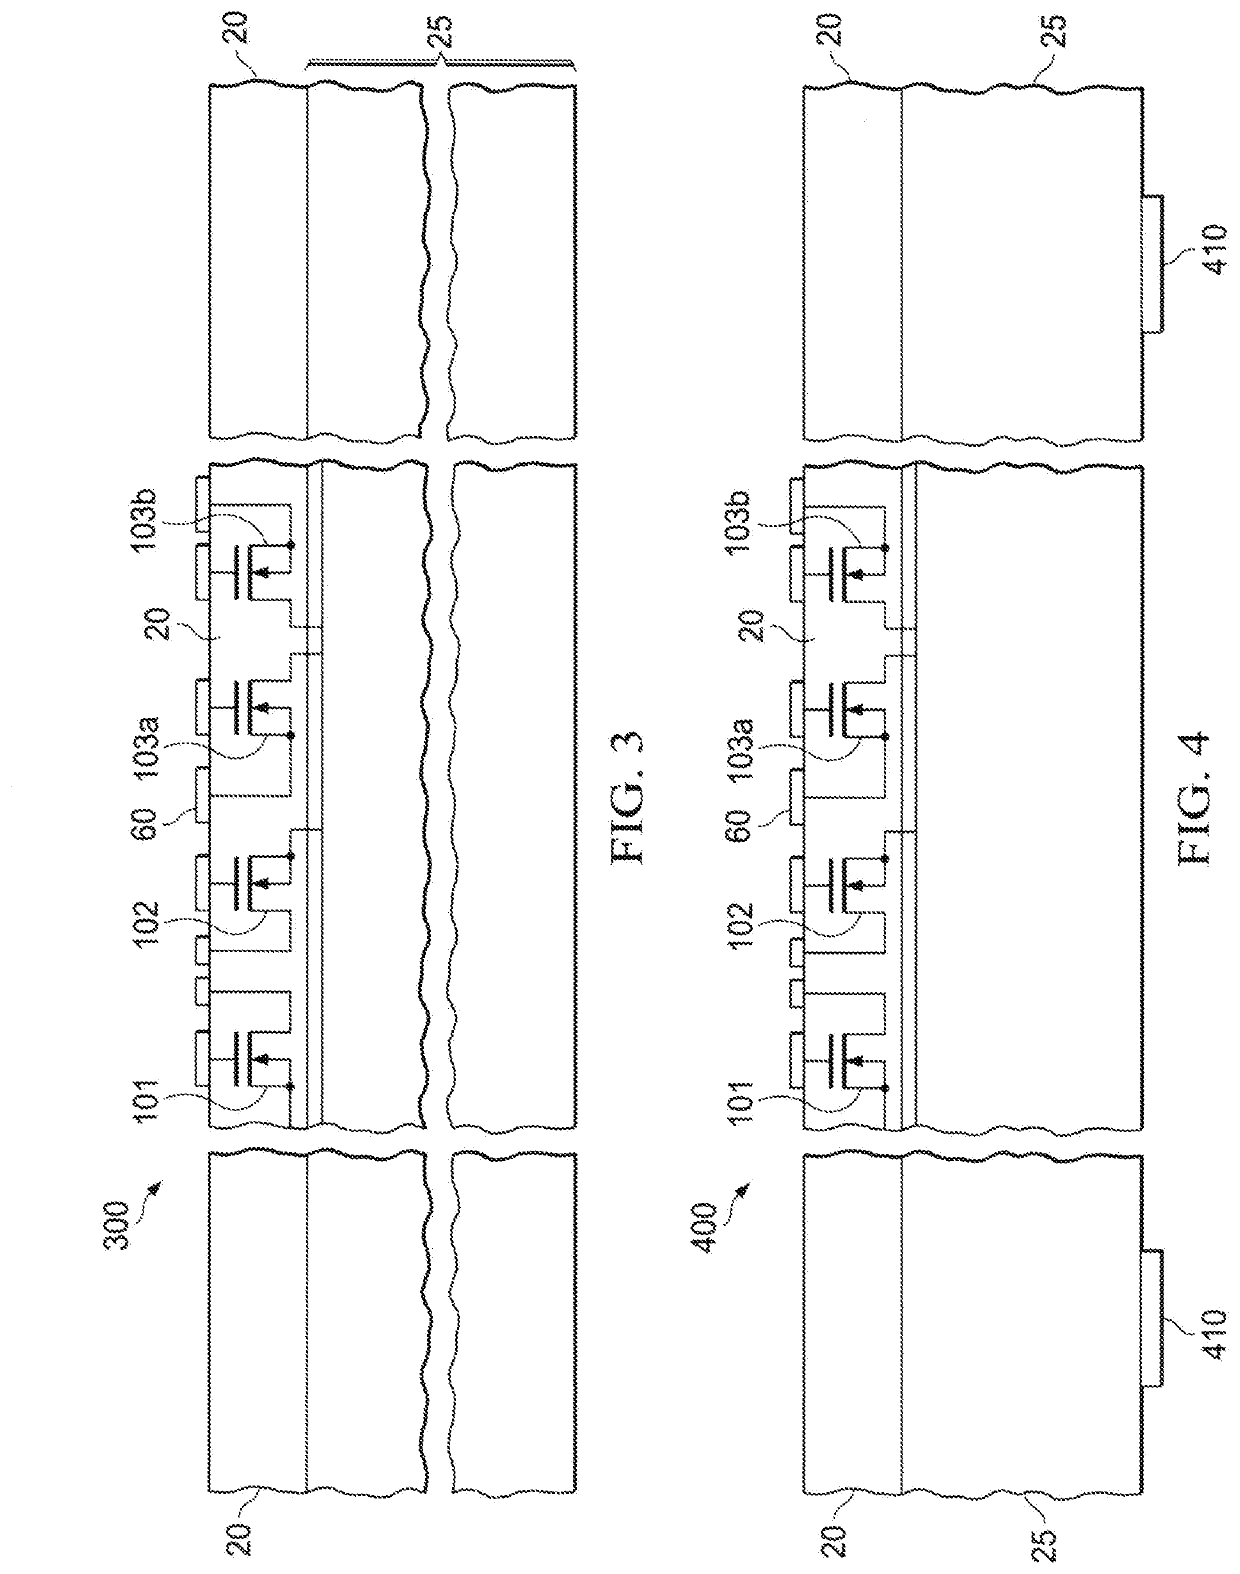 Thinned semiconductor chip with edge support